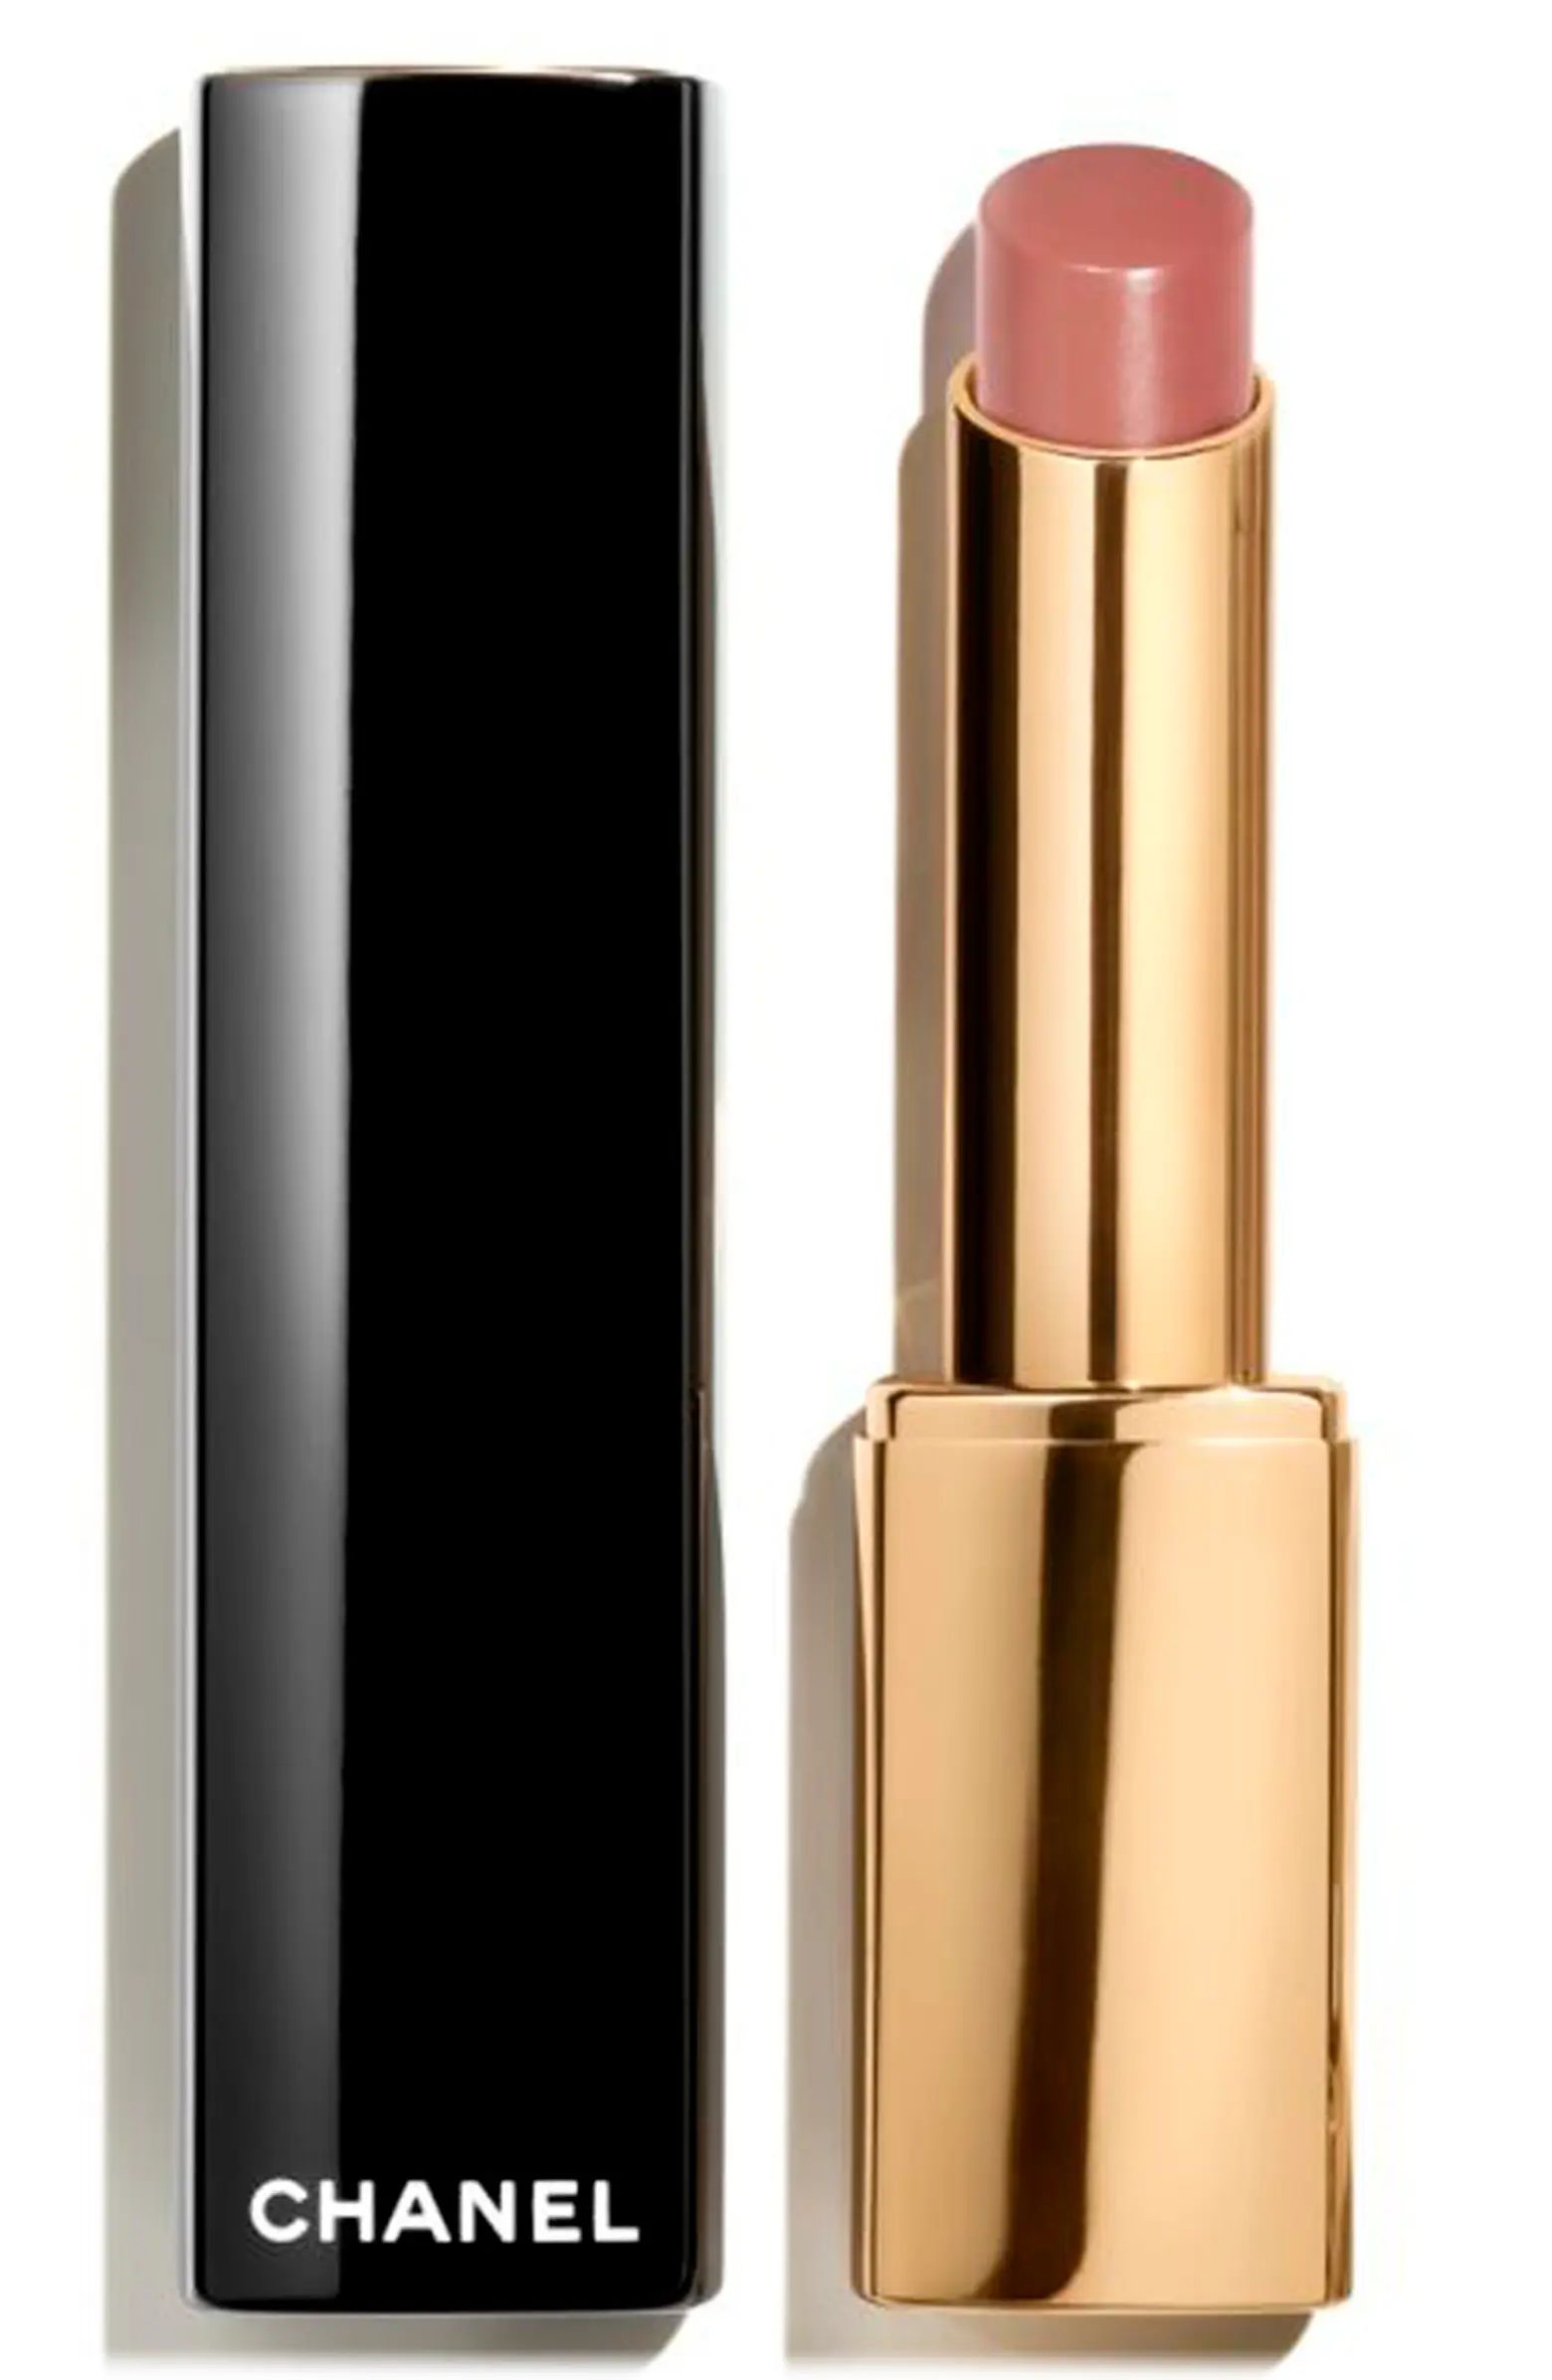 ROUGE ALLURE L’EXTRAIT High-Intensity Lip Color Concentrated Radiance and Care Refillable | Nordstrom